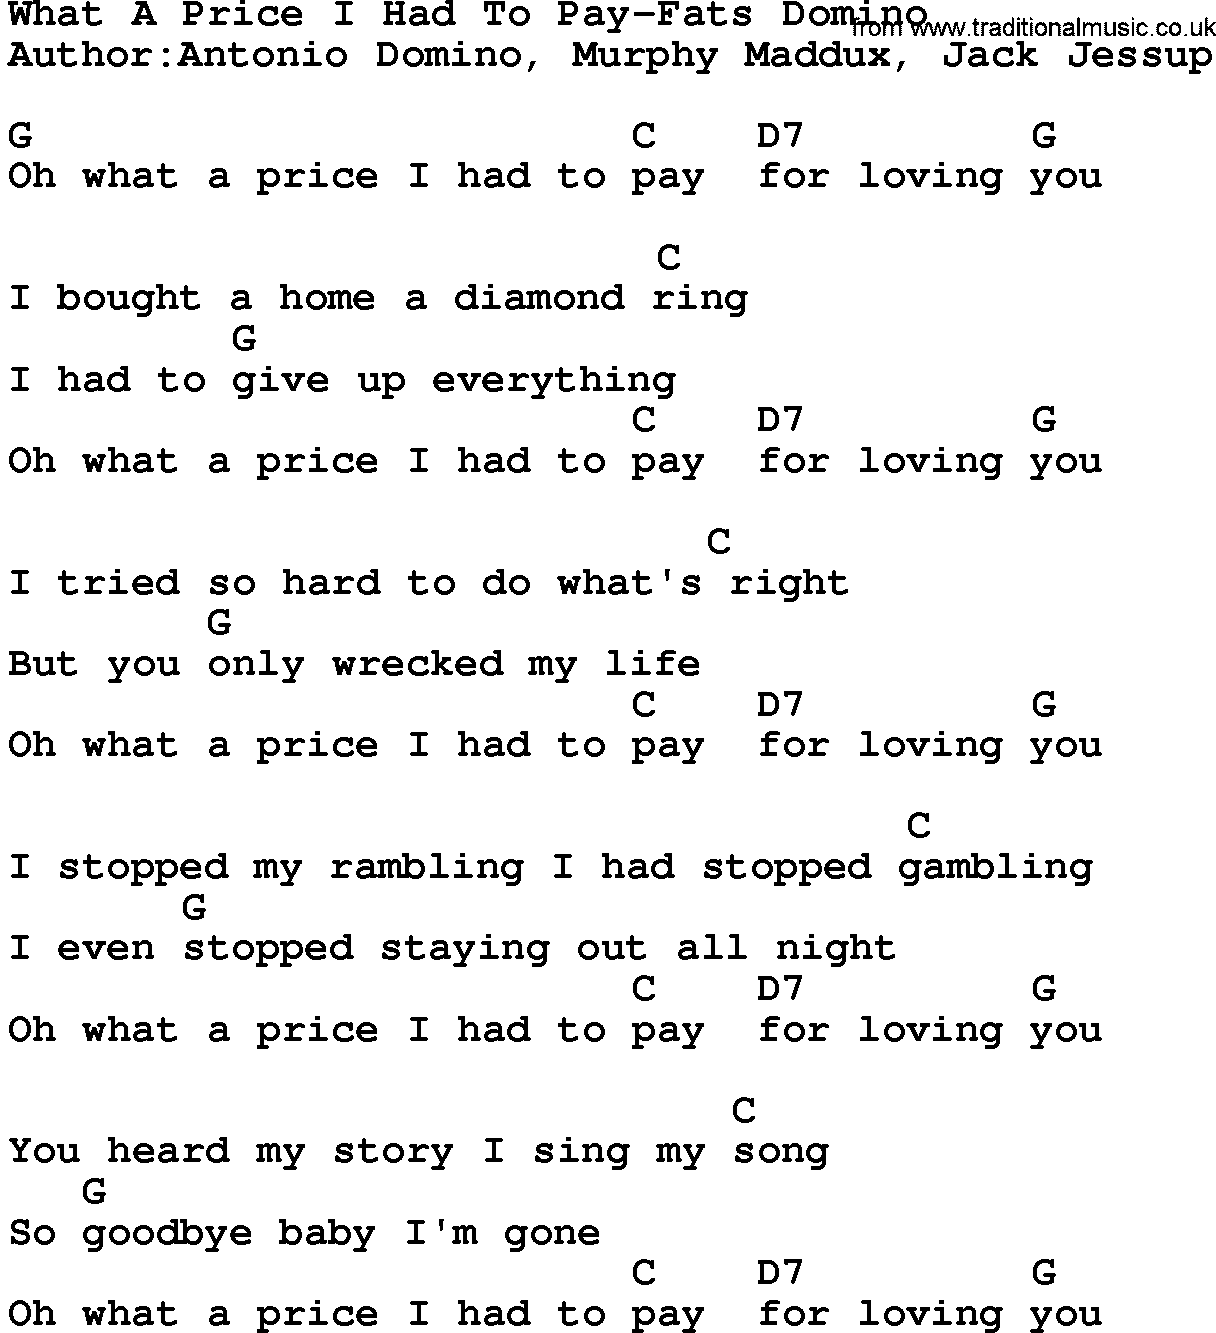 Country music song: What A Price I Had To Pay-Fats Domino lyrics and chords